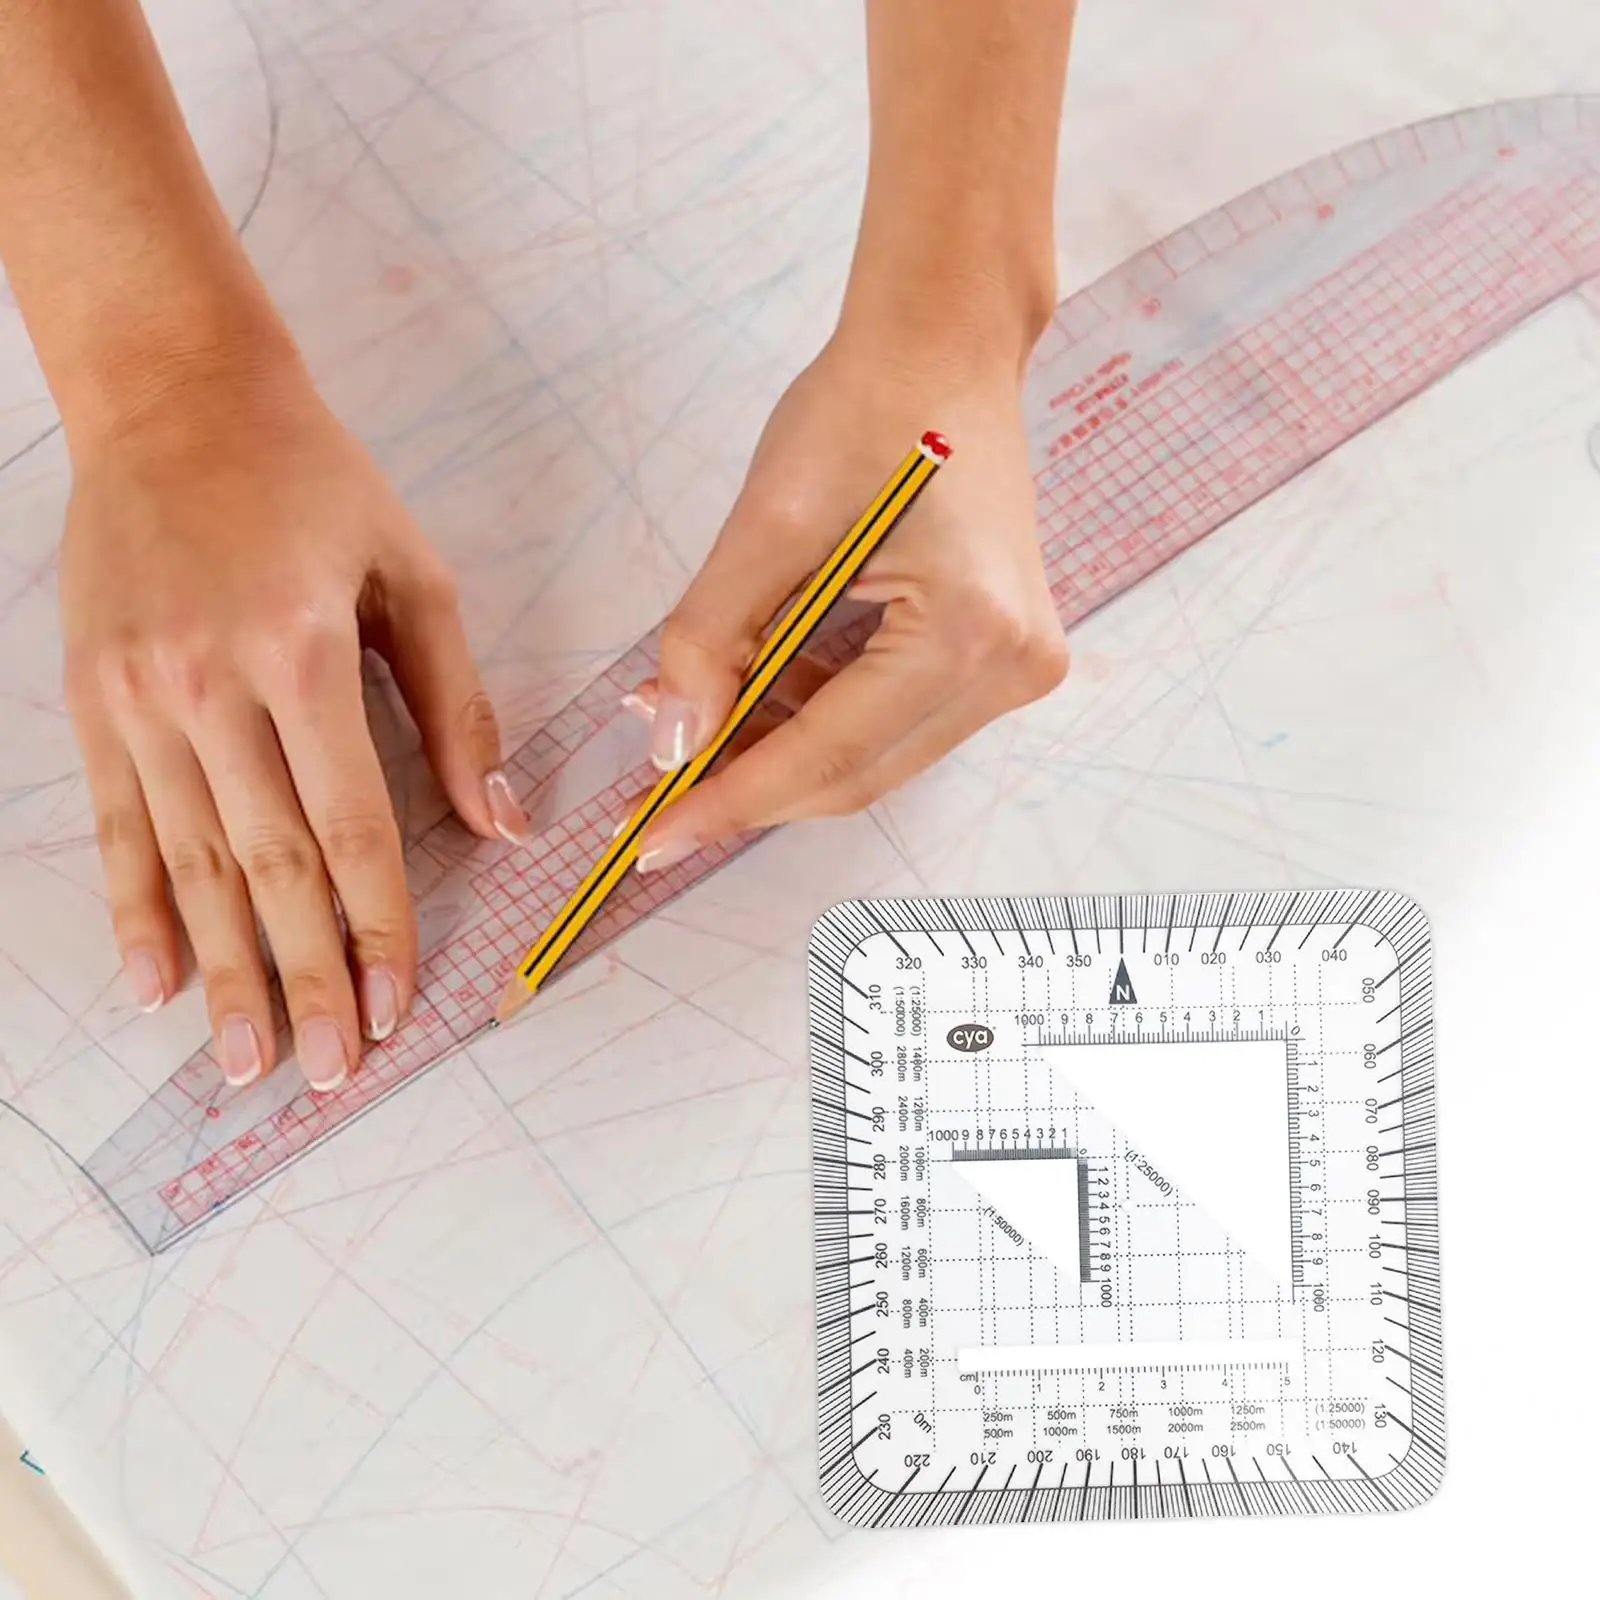 Protractor Ruler Architects Accurate Measuring Engineering Drawing Maptool Pocket Grid for Utm, Usng, Mgrs Coordinates Traveling